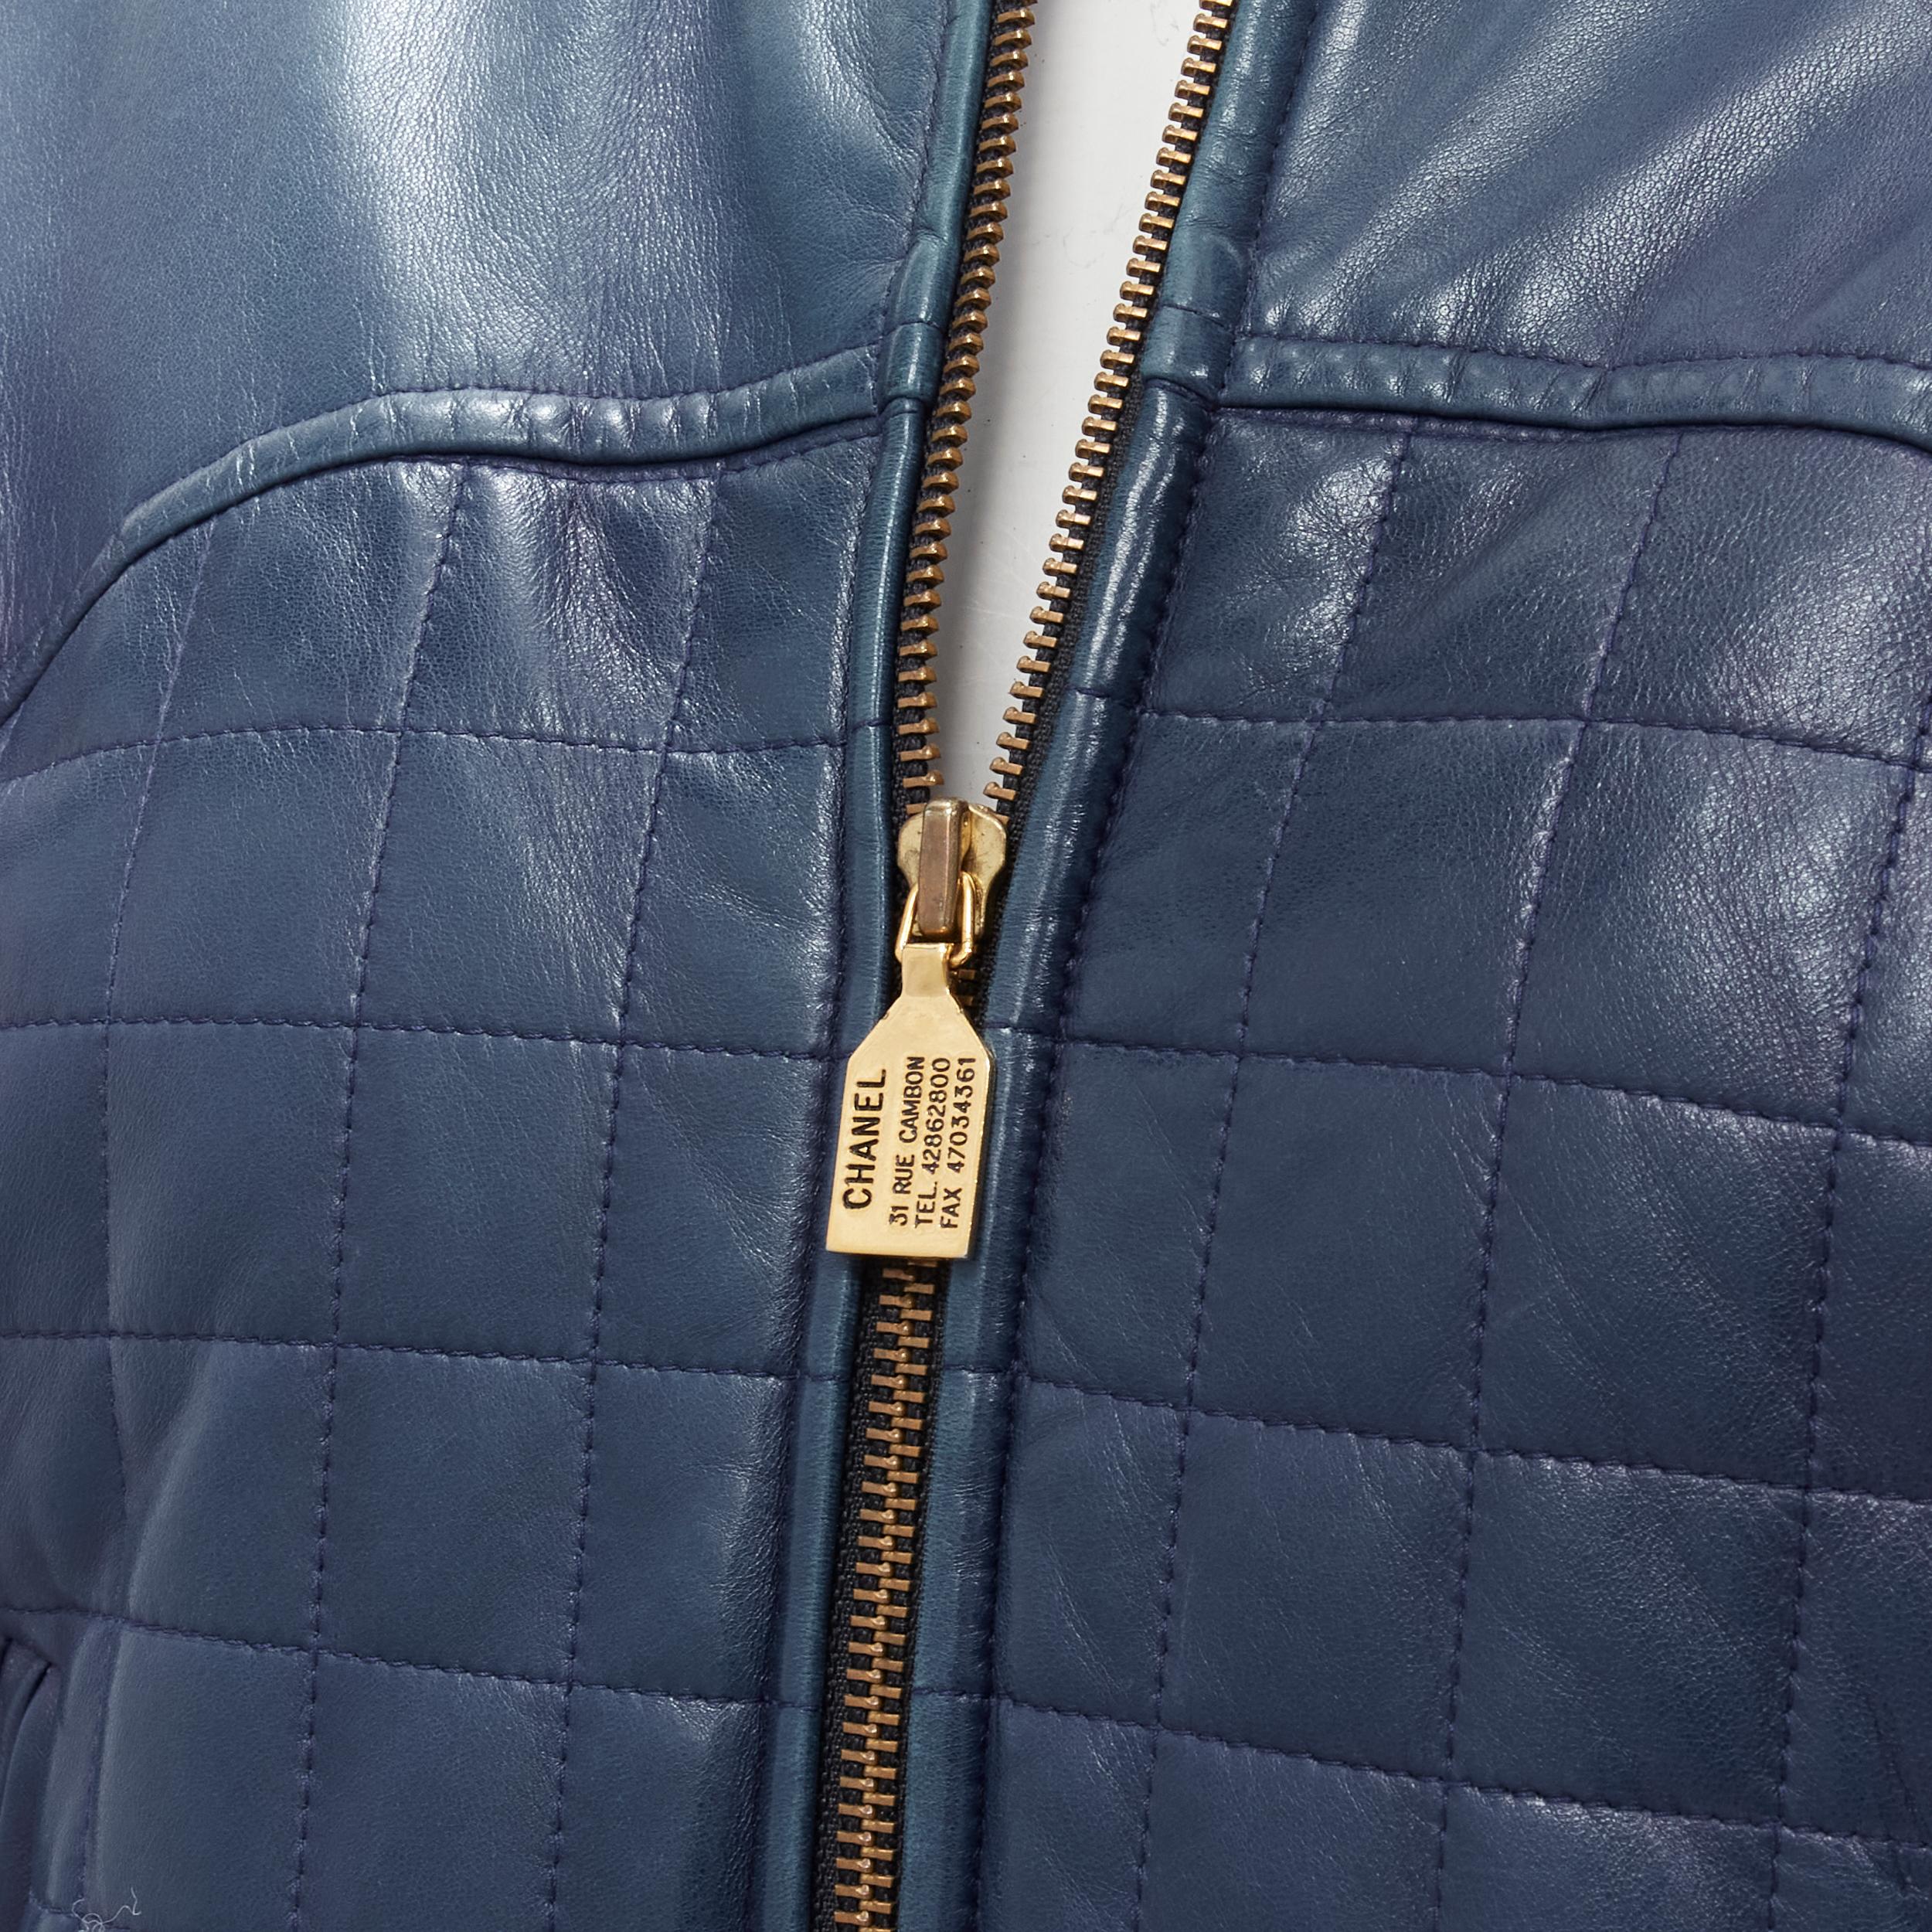 CHANEL 91A  gold 31 Rue Cambon zip charm navy quilted leather jacket FR44 XL
Brand: Chanel
Designer: Karl Lagerfeld
Collection: 91A 
Material: Leather
Color: Blue
Pattern: Solid
Closure: Zip
Extra Detail: Navy blue soft leather upper. Quilt